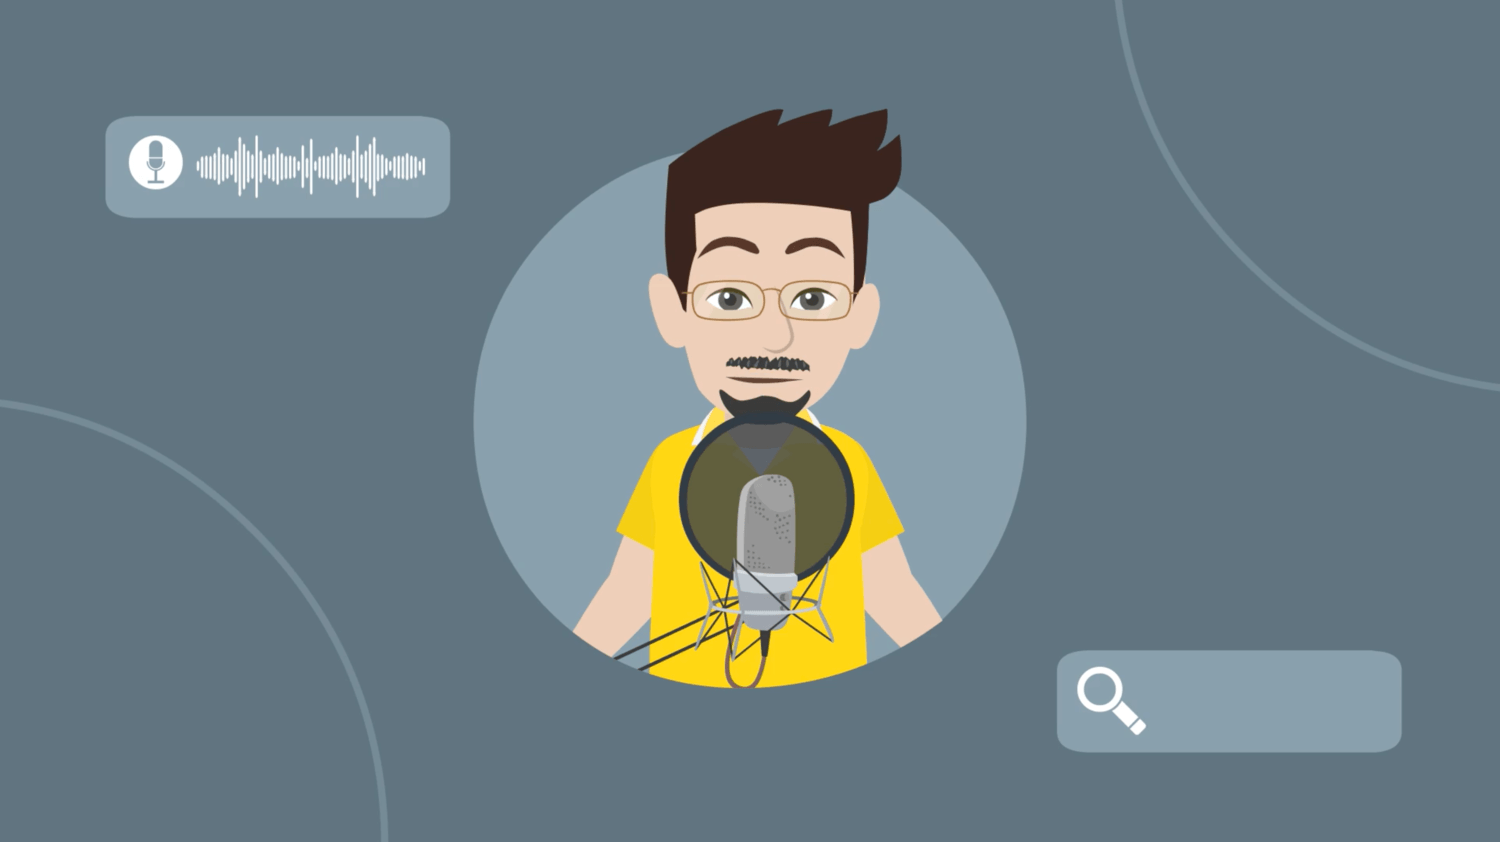 Animated image of a man speaking into a professional microphone to display how to record voice overs